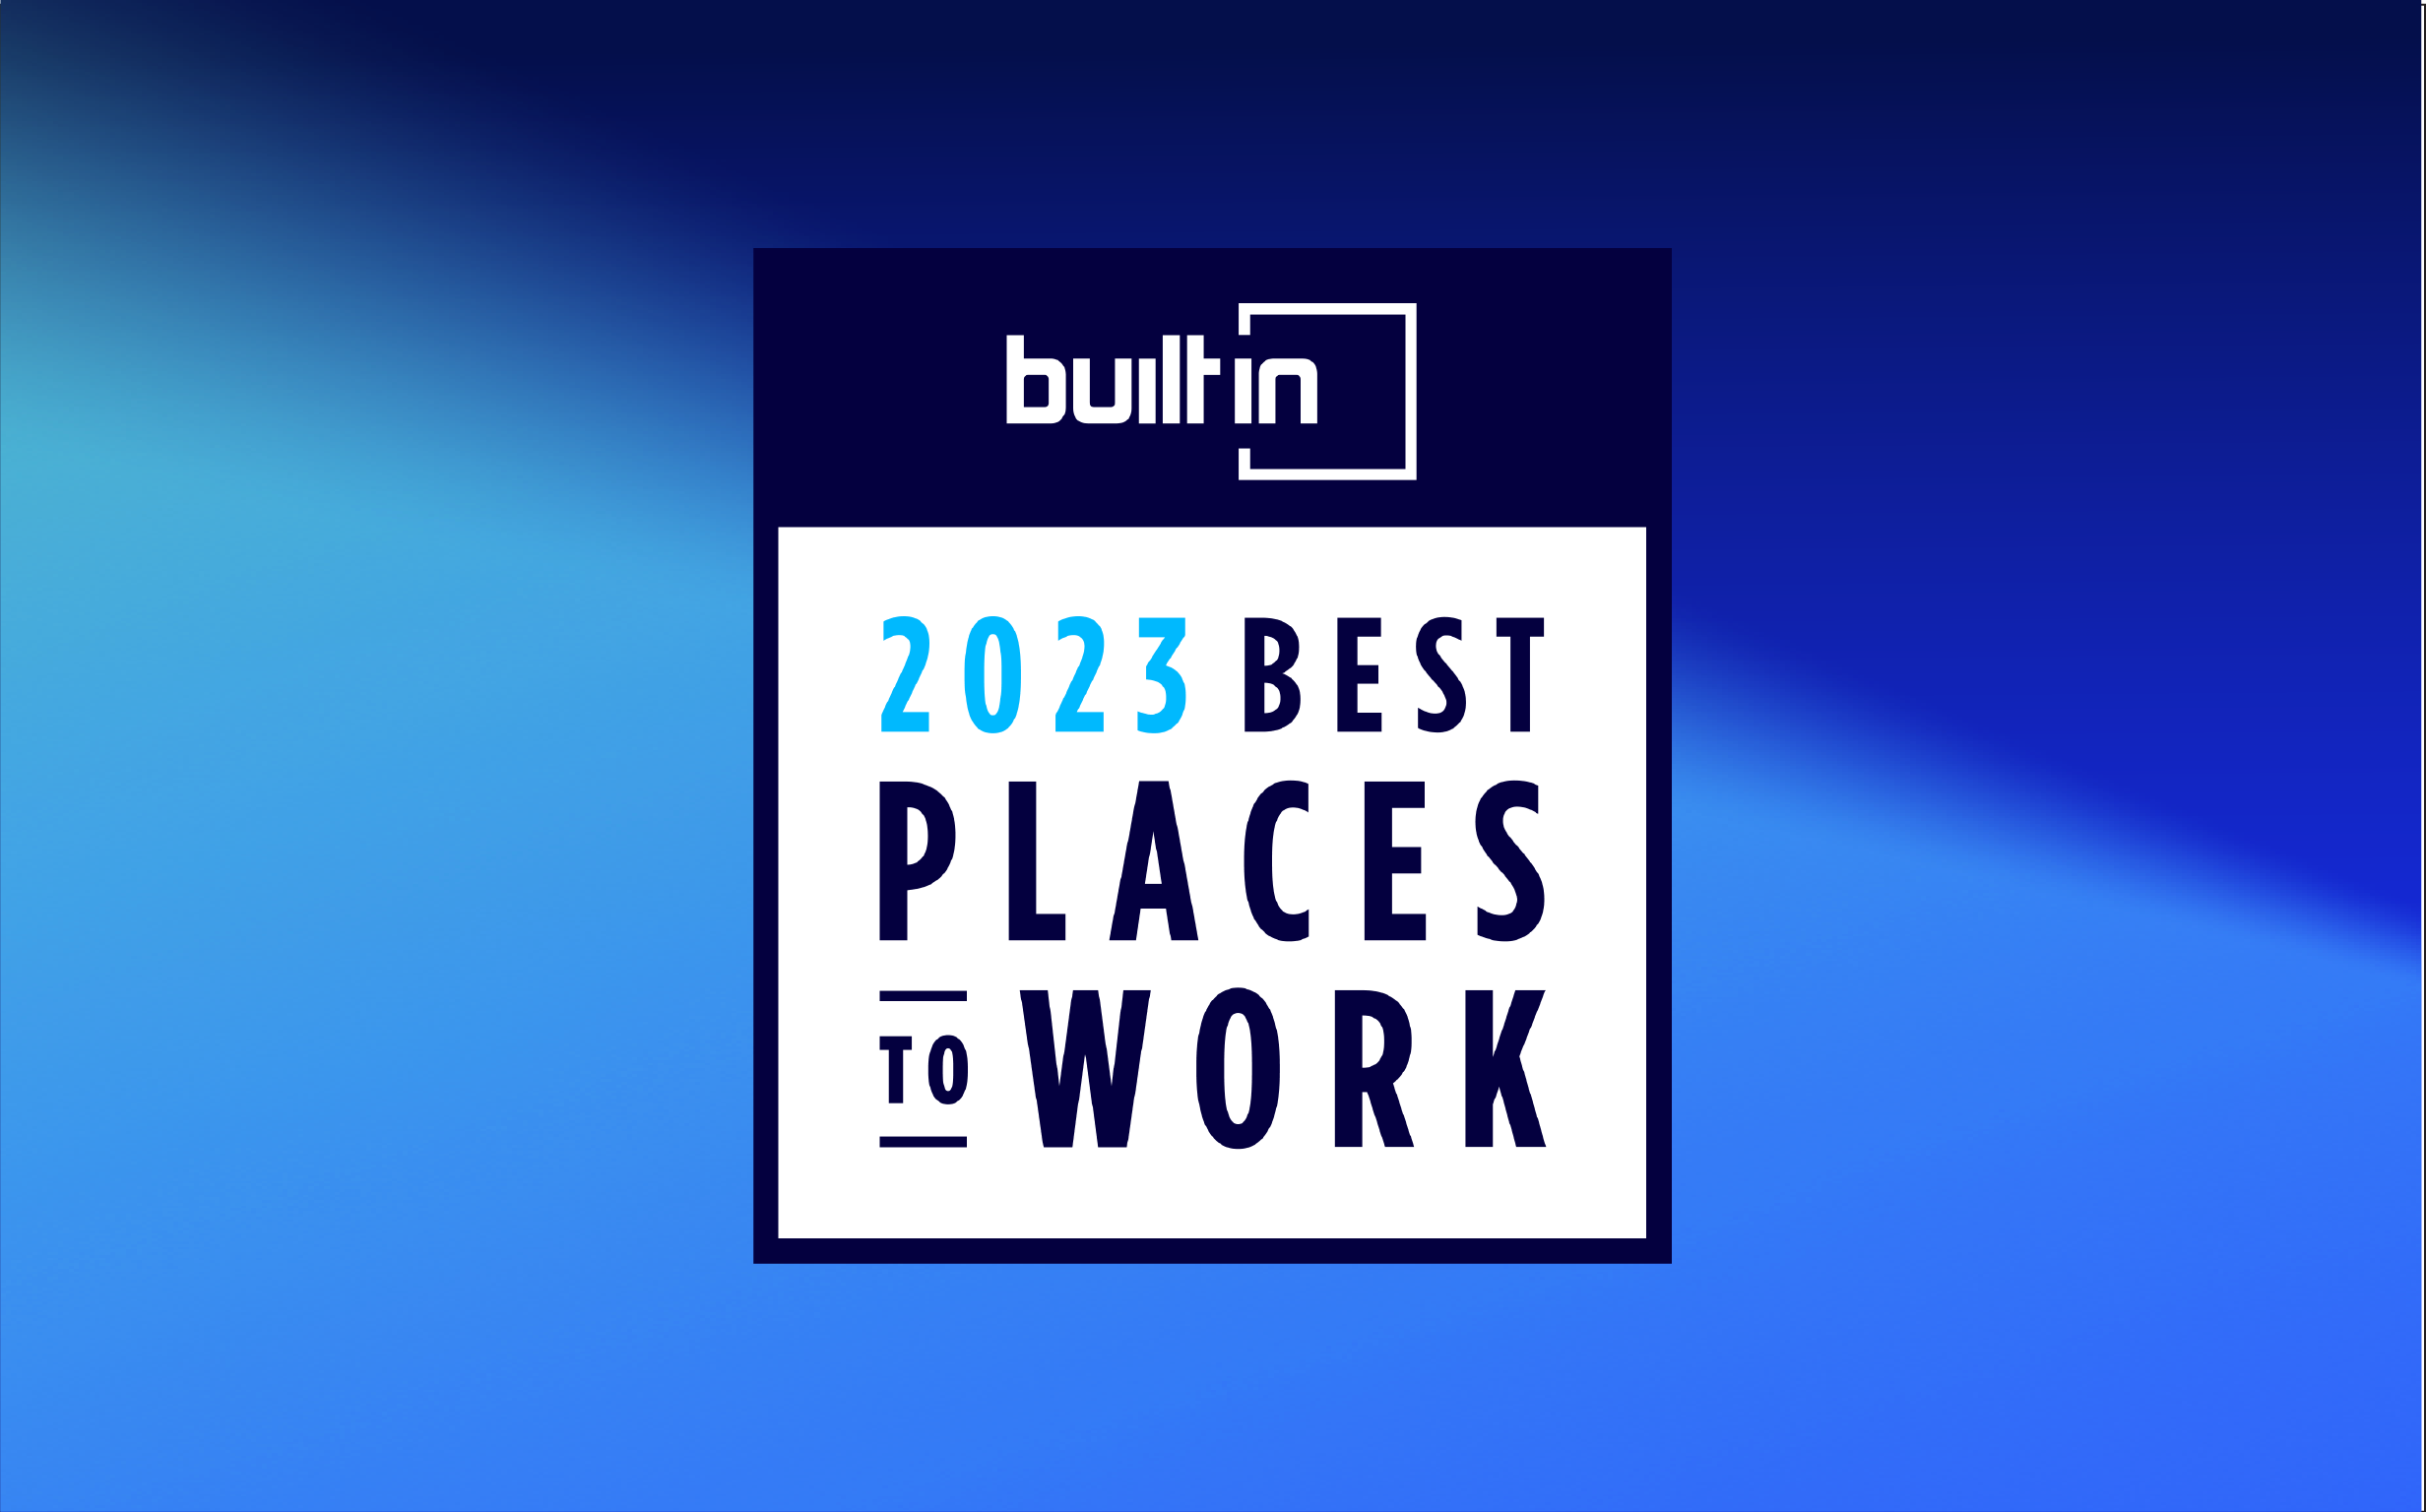 Built In Names LogicMonitor in 2023 Best Places to Work Awards for Fifth Consecutive Year